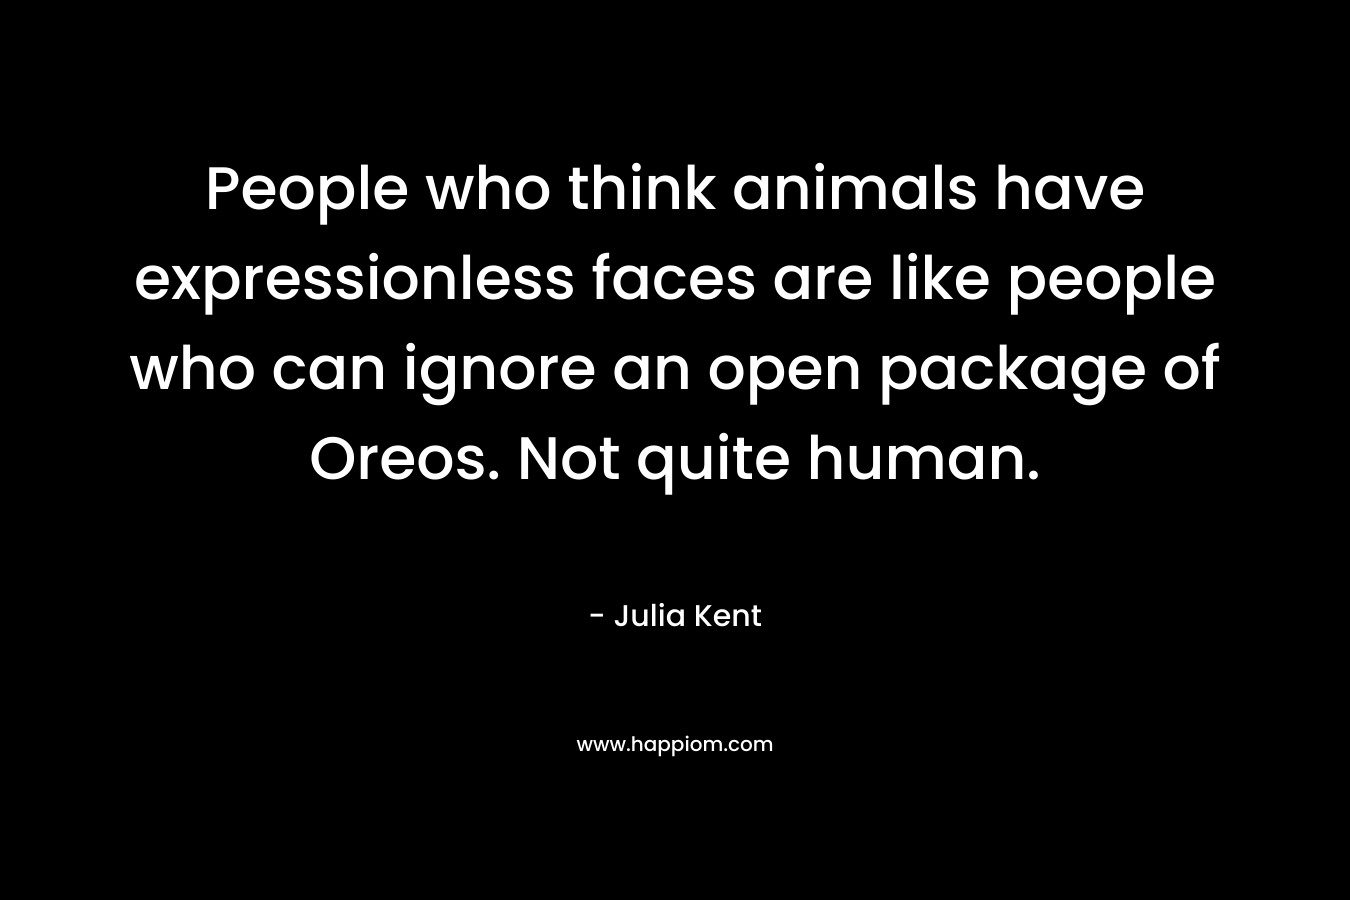 People who think animals have expressionless faces are like people who can ignore an open package of Oreos. Not quite human. – Julia Kent